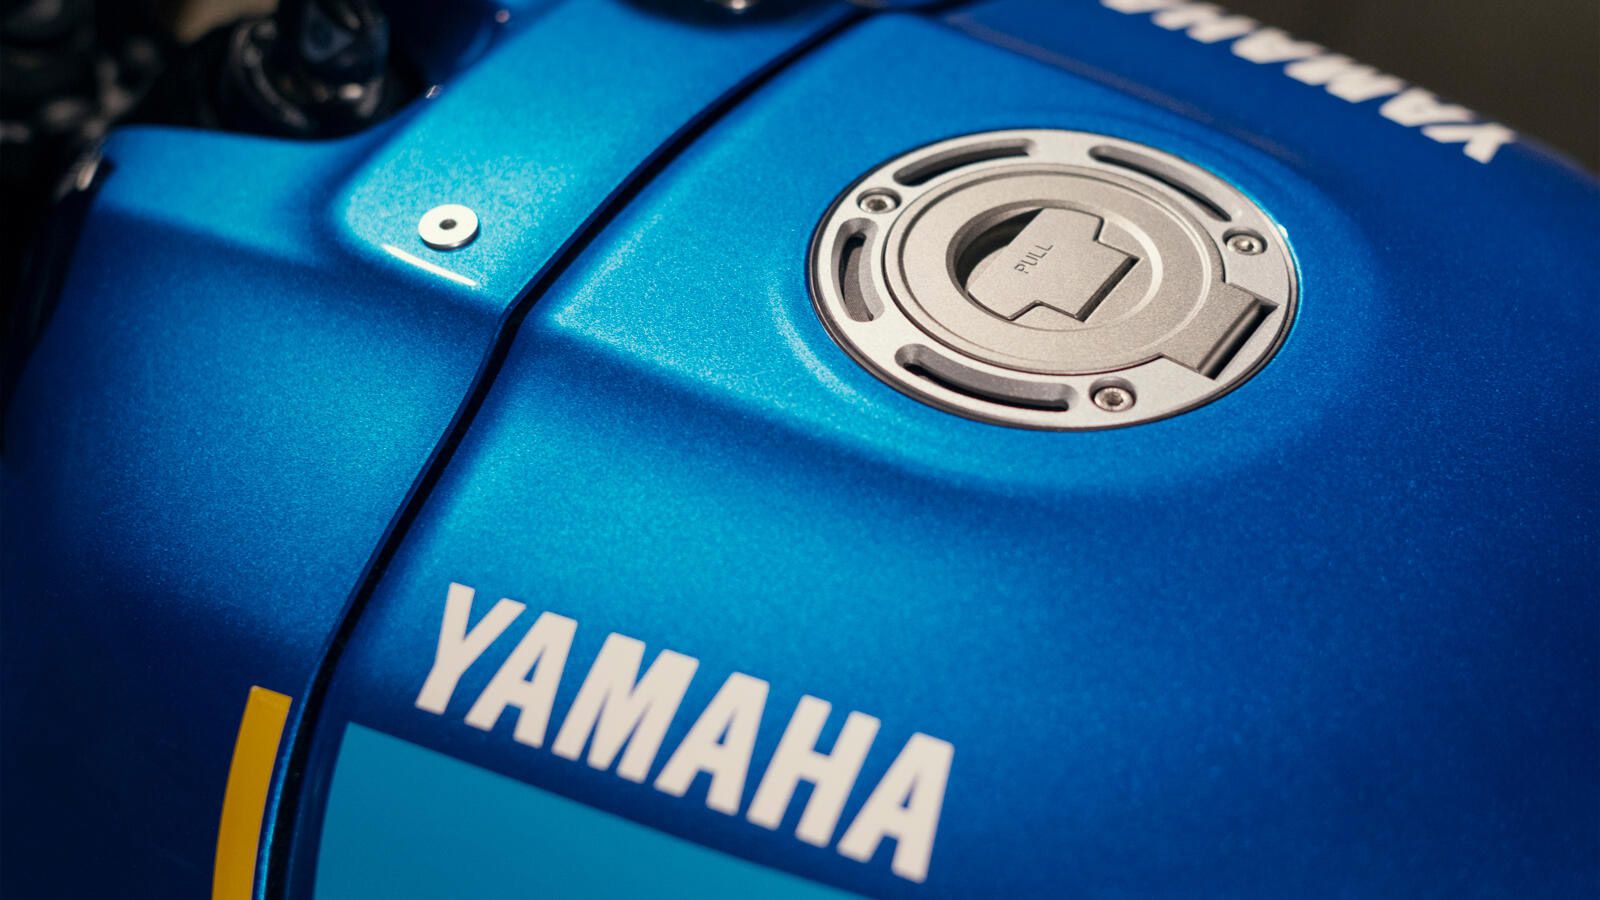 A race-inspired fuel tank is inspired by Yamaha’s ’80s GP machines.